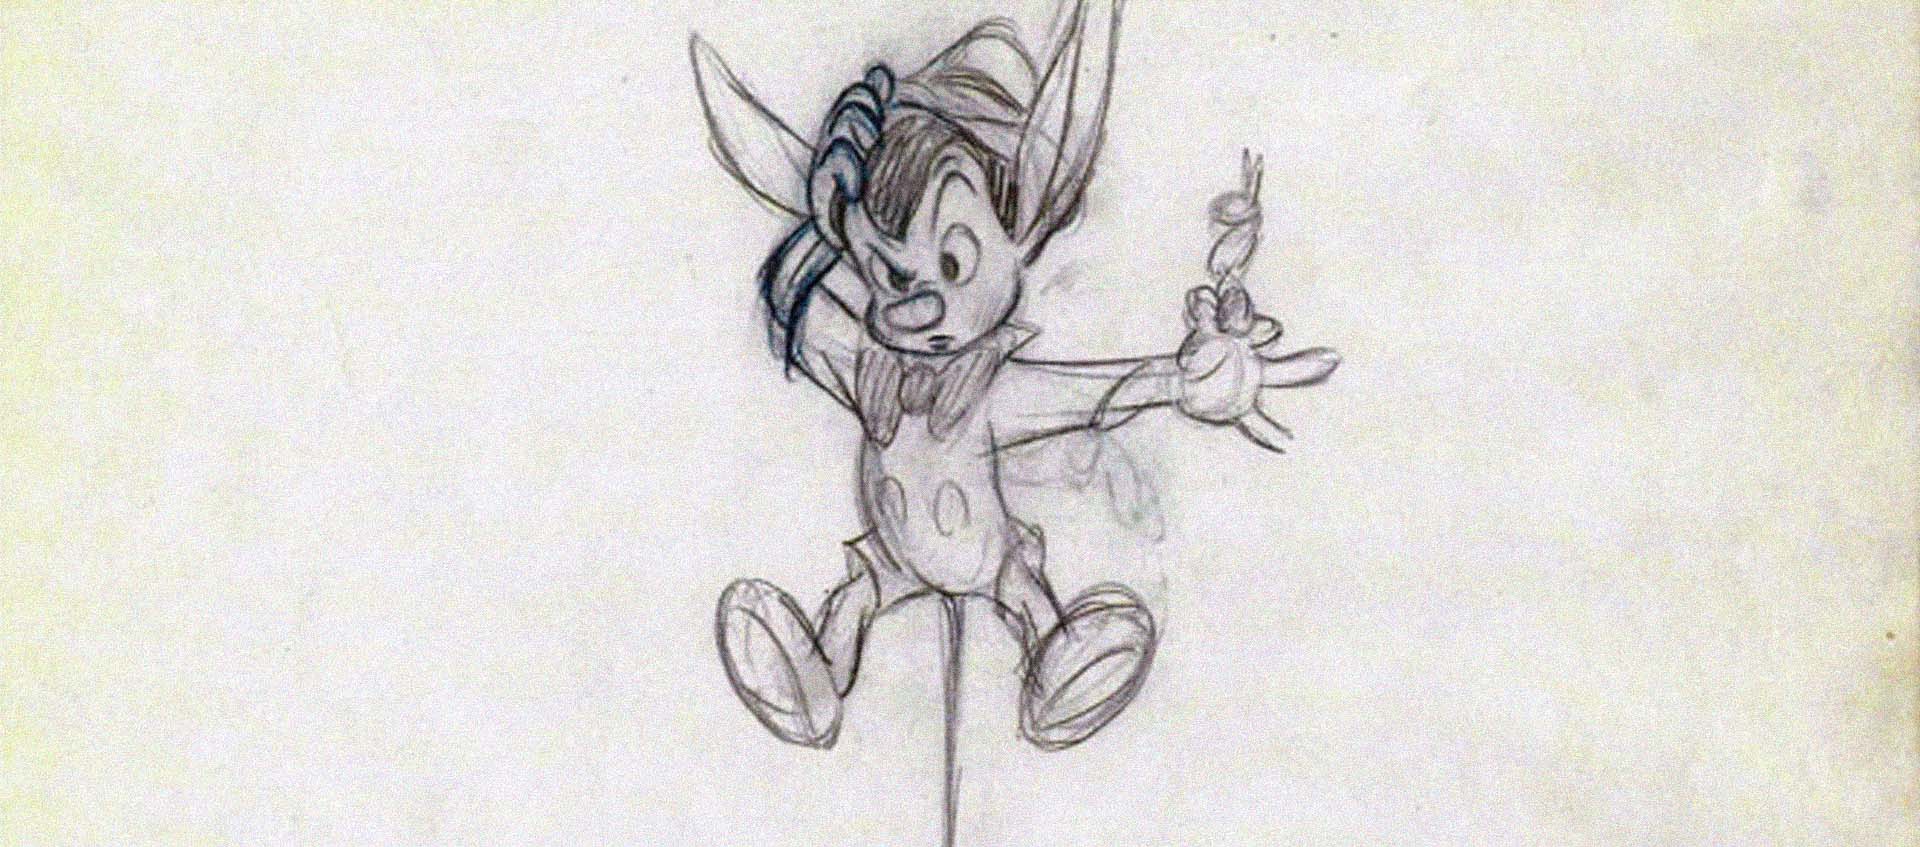 Artist's sketch of character form Pinocchio